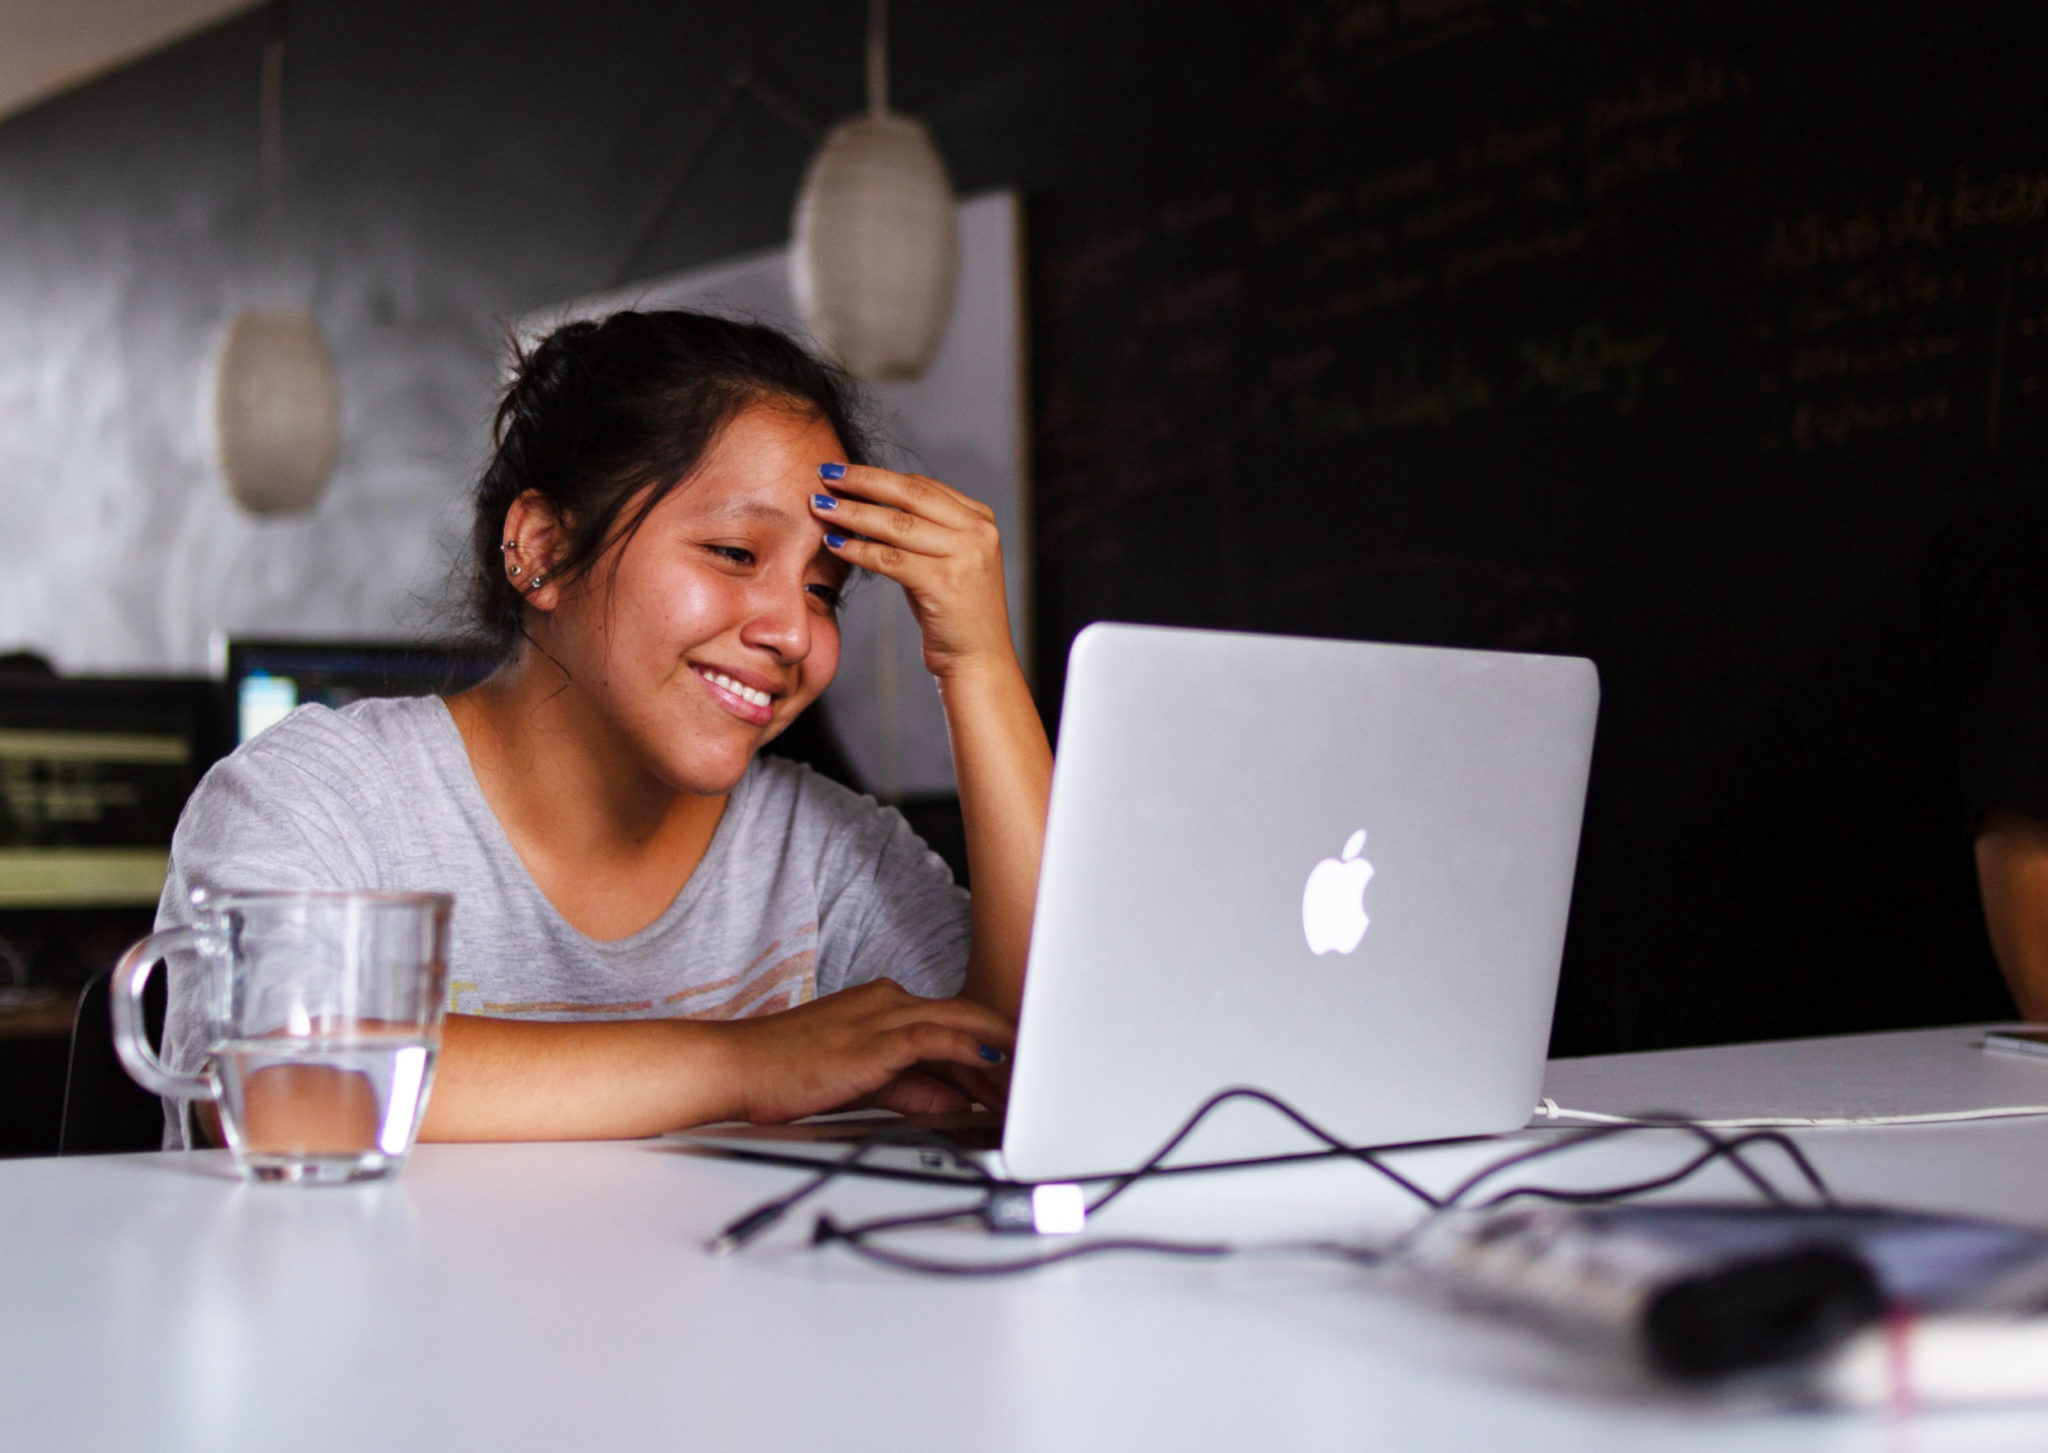 Girl smiling while working at the computer.